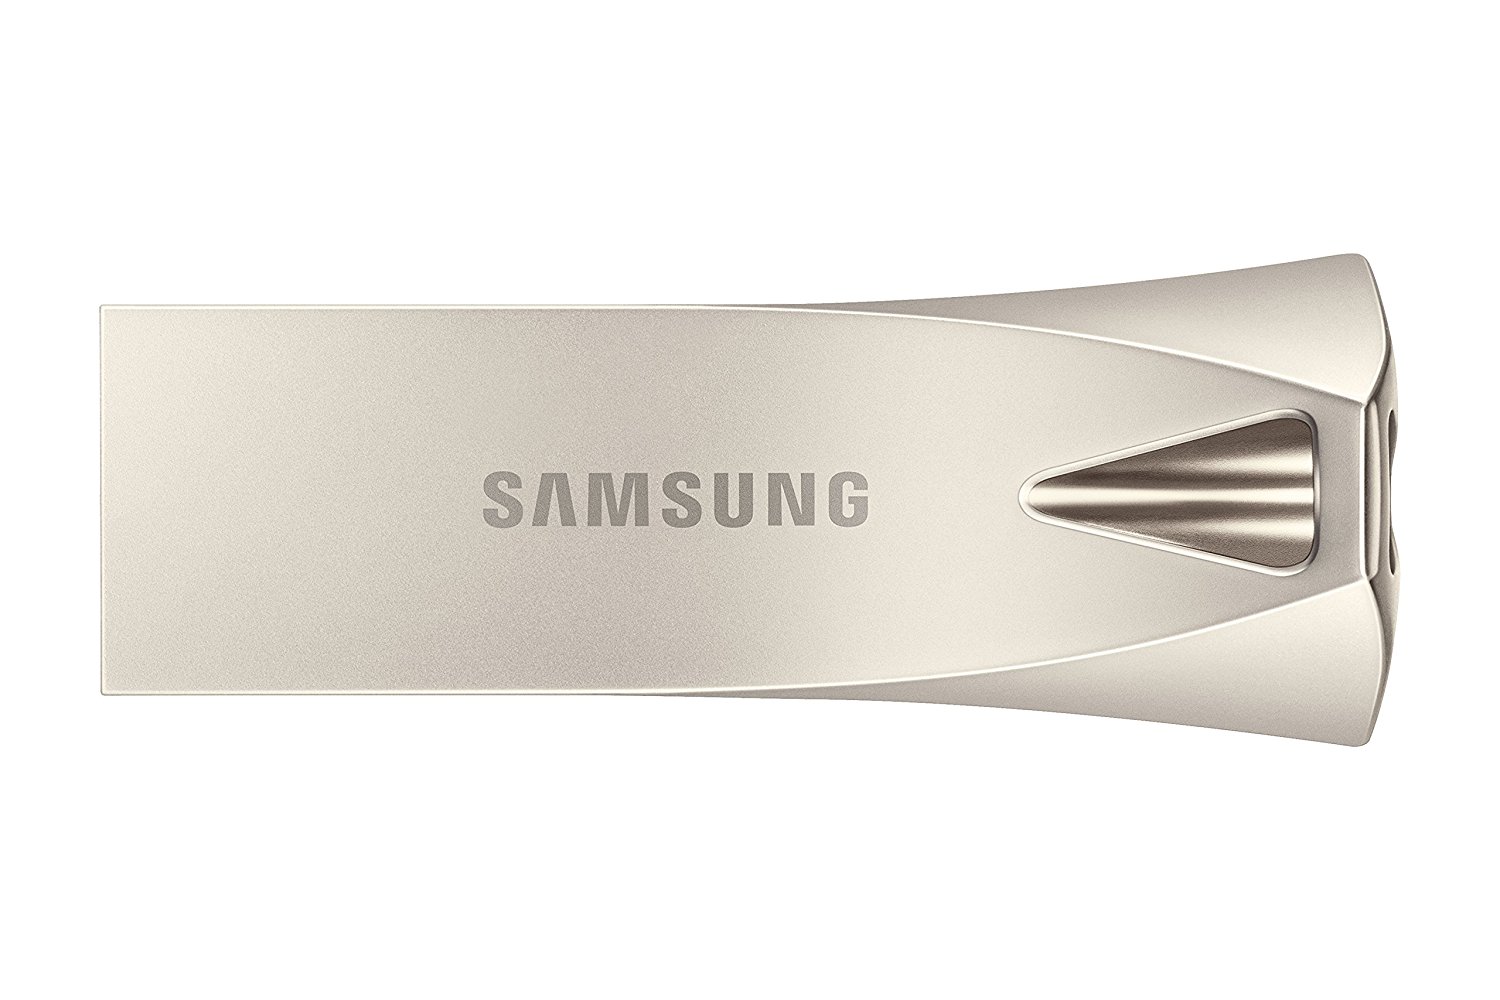 SAMSUNG 128GB BAR Plus (Metal) USB 3.1 Flash Drive, Speed Up to 400MB/s (MUF-128BE3/AM) - image 1 of 12